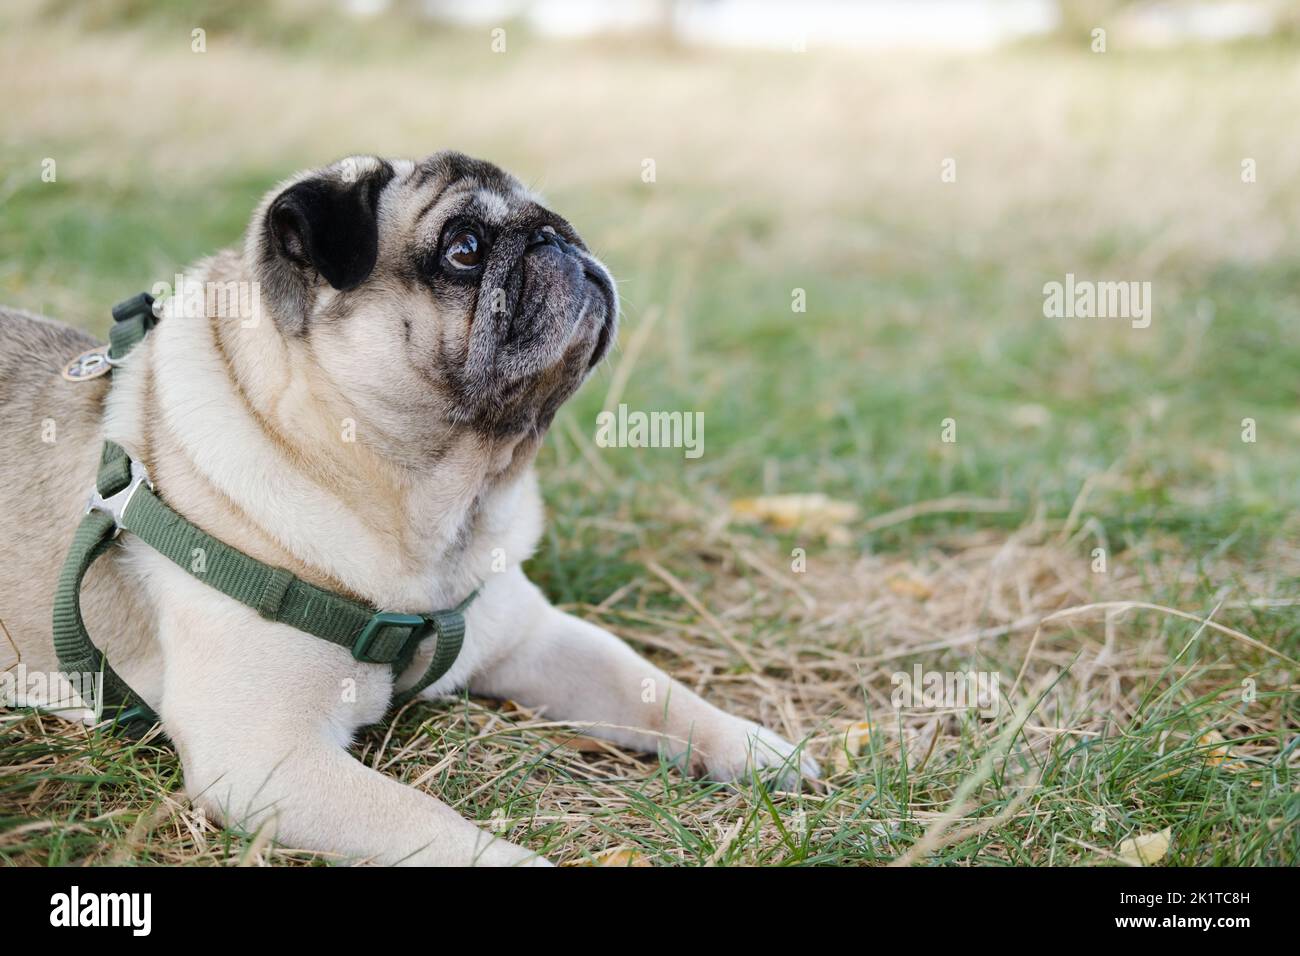 Funny pug looking up, laying outdoors on the lawn. Beautiful aging dog portrait, copy space image Stock Photo